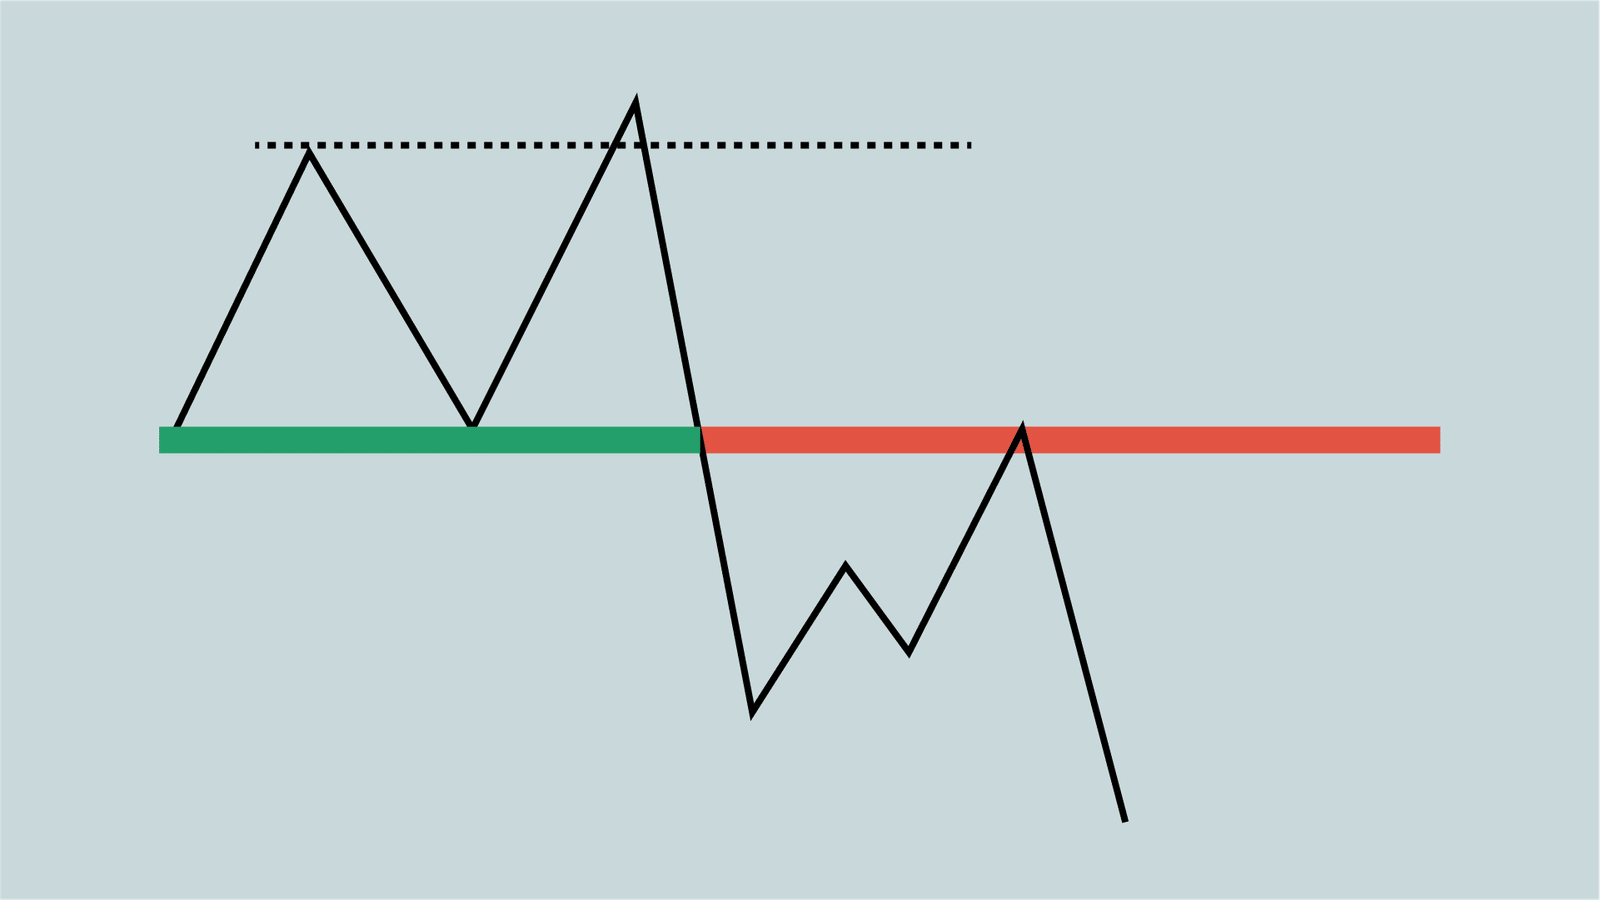 Developing a Trading Strategy Using Technical Indicators